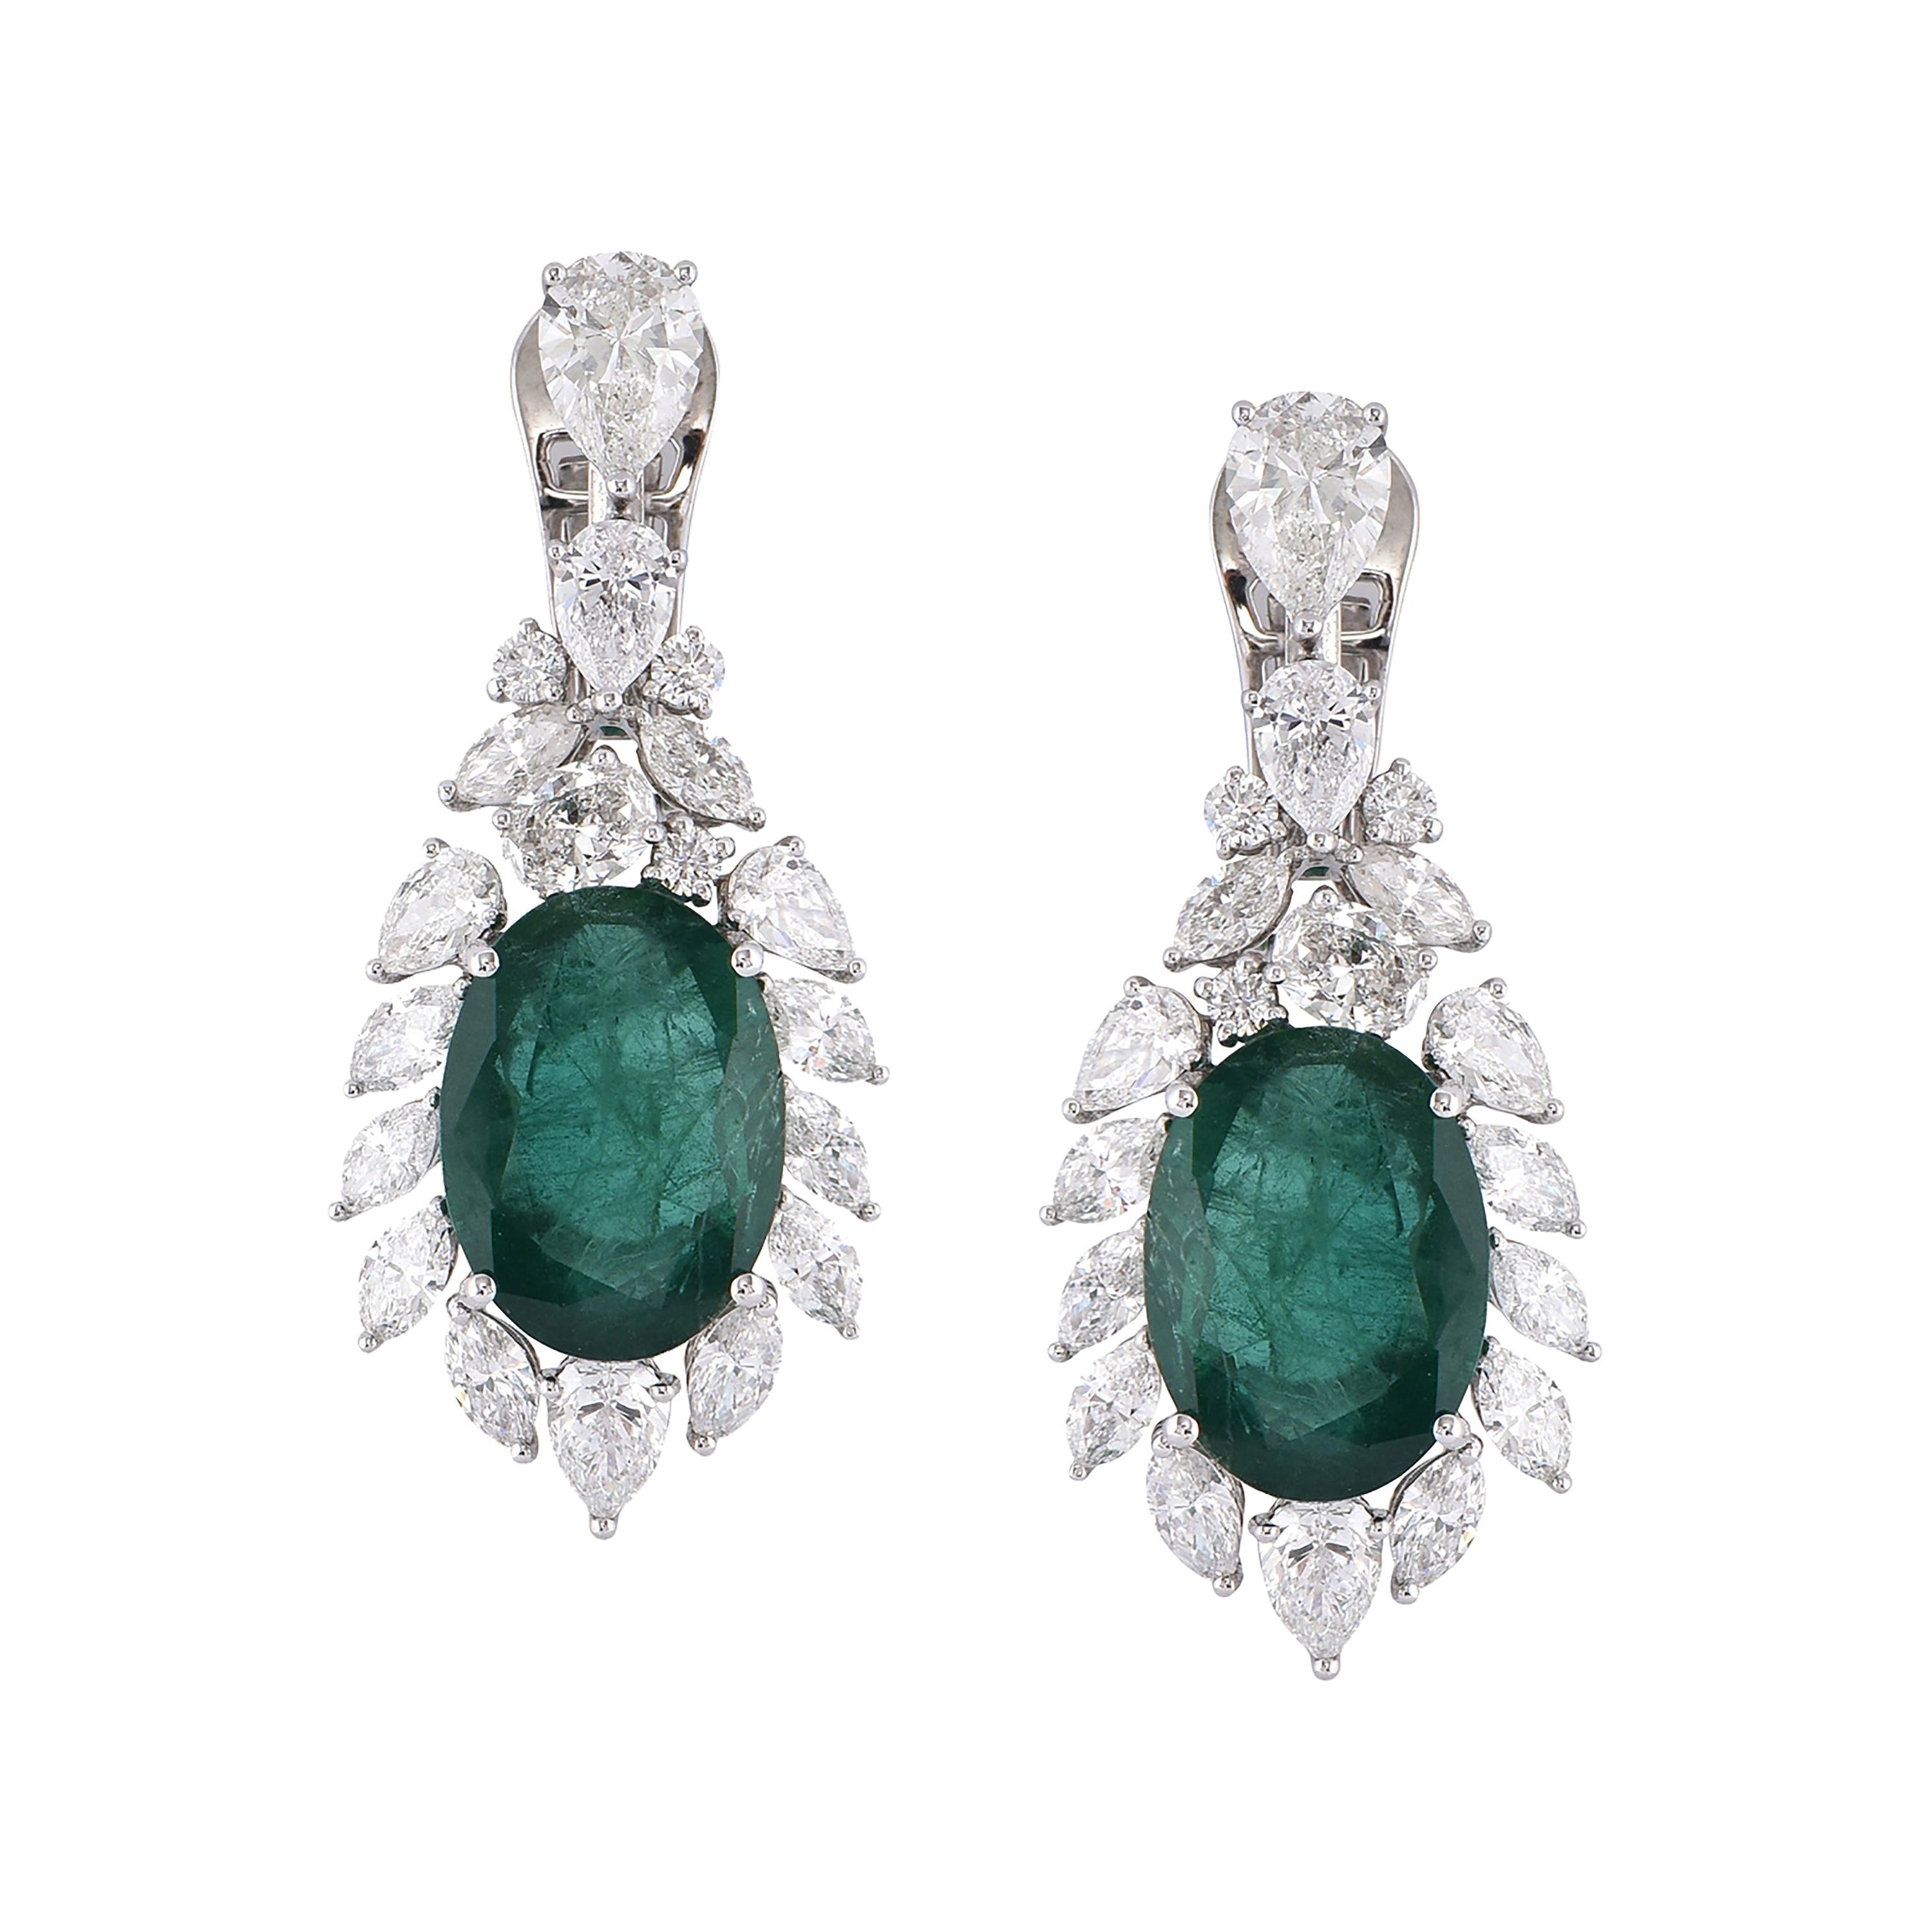 Laviere 13.59 Carat Emerald and Diamond Earrings For Sale